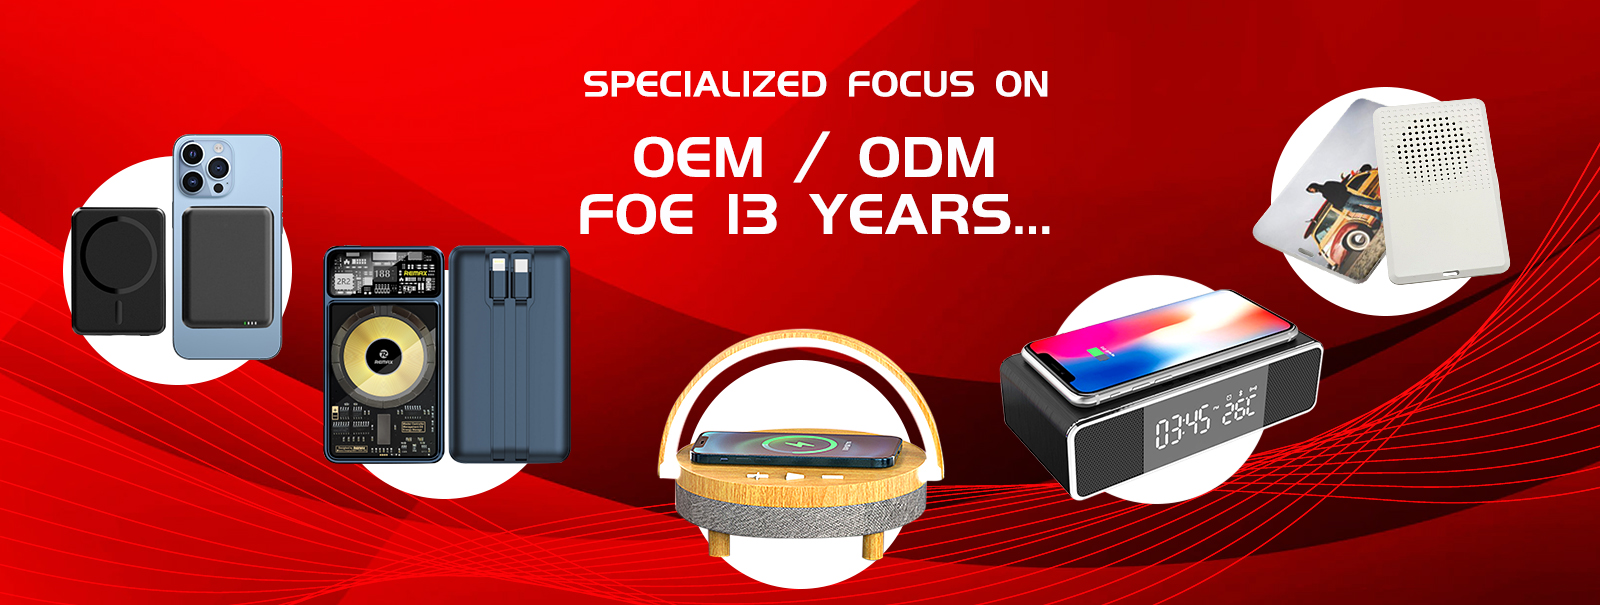 Specialized Focus on OEM/ODM for 11 years